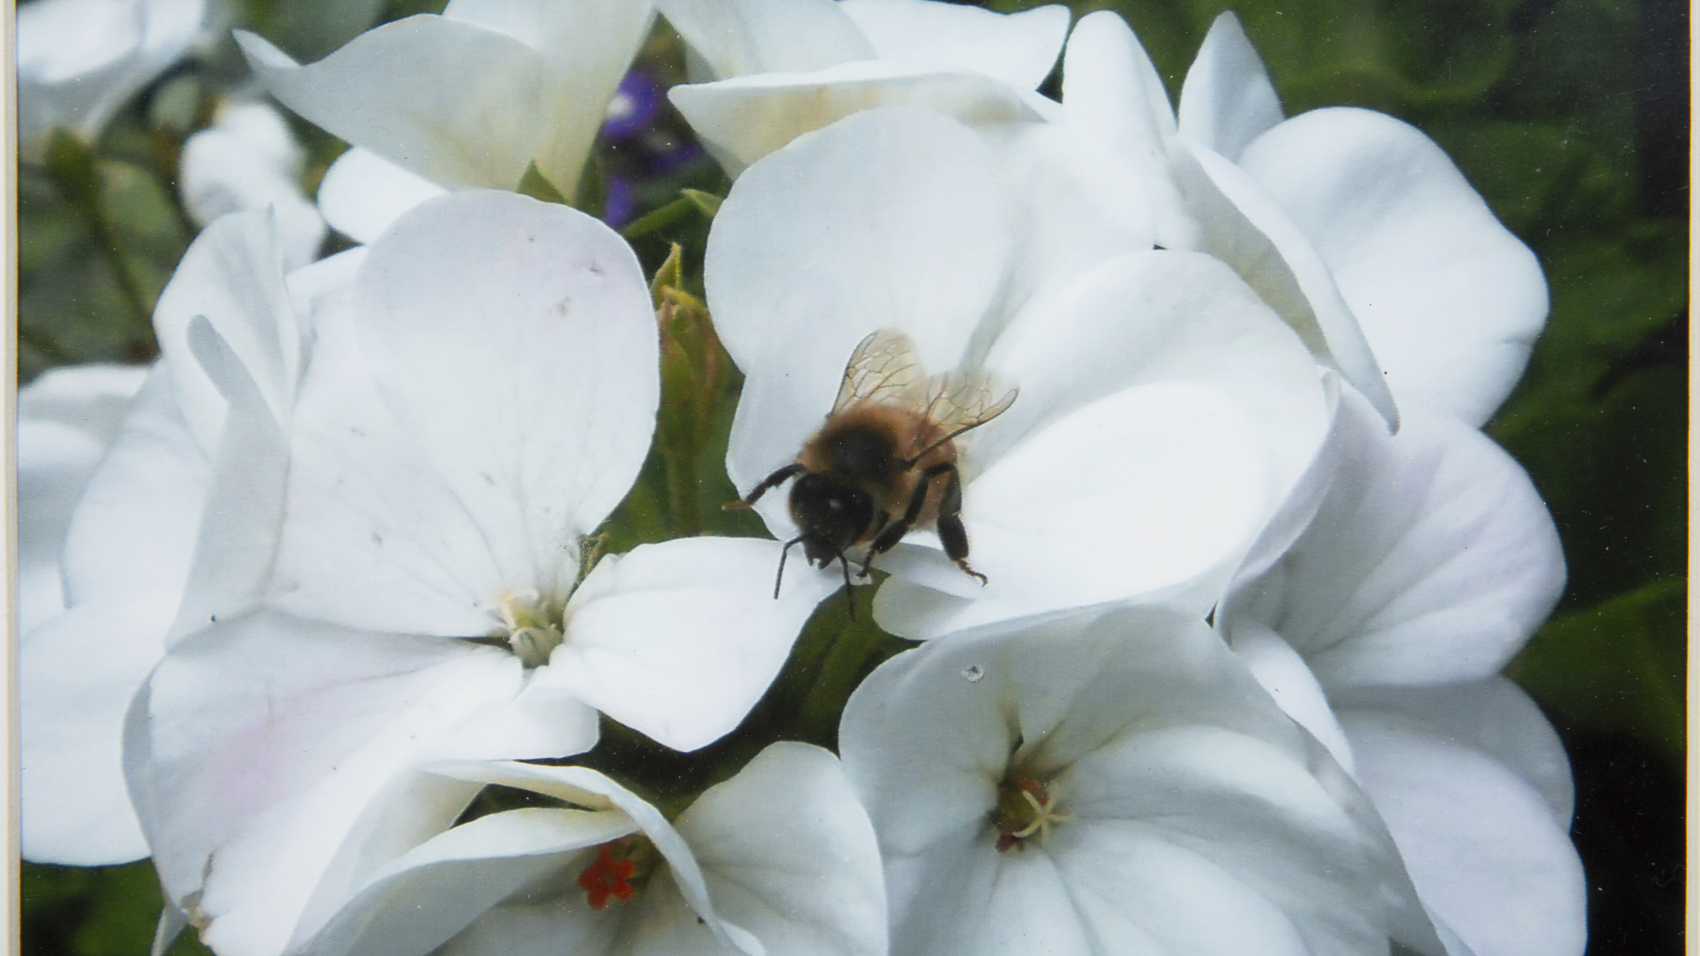 Photography - Bee on Geranium - photograph of white geranium's with a bumble bee on the petals of the flowers.